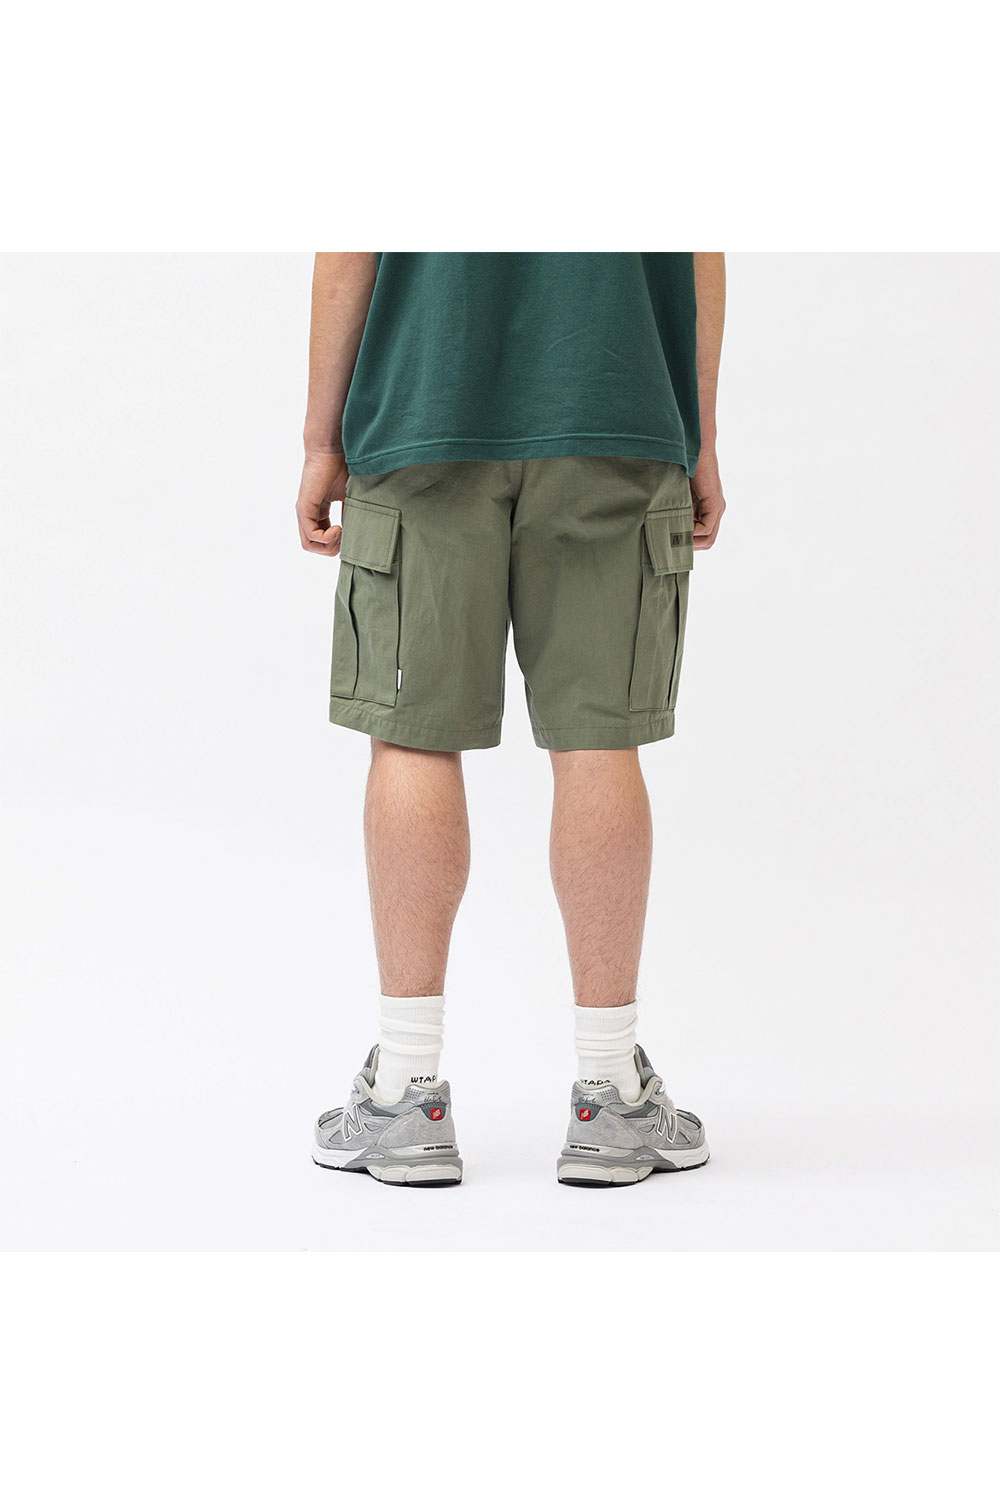 MILS9601 / SHORTS / NYCO. RIPSTOP / OLIVE DRAB (231WVDT-PTM10 